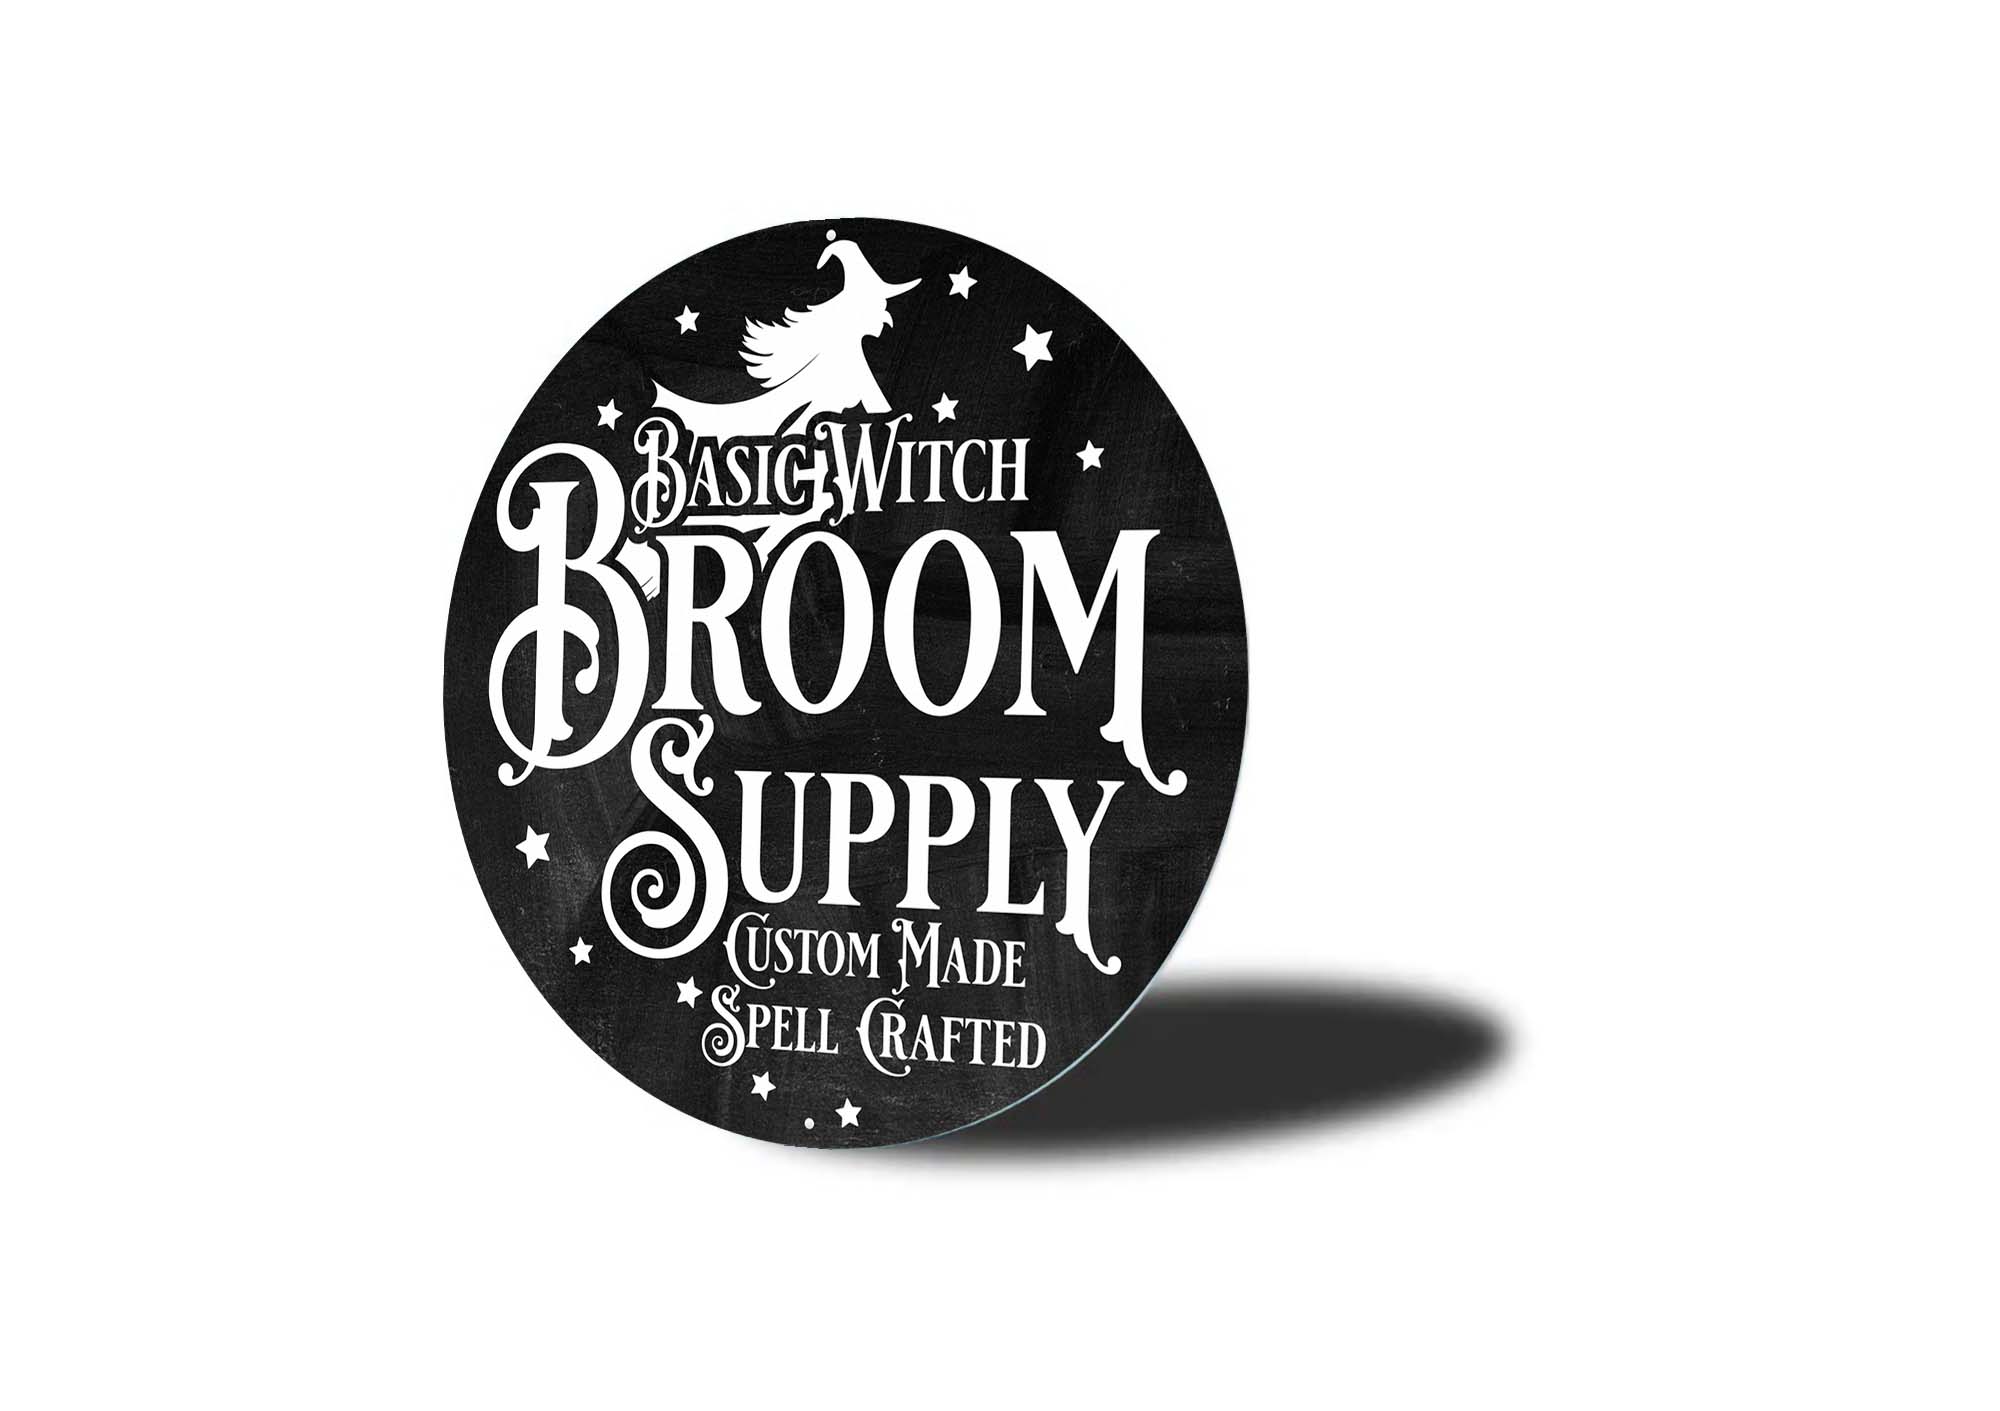 Basic Witch Broom Supply Halloween Sign